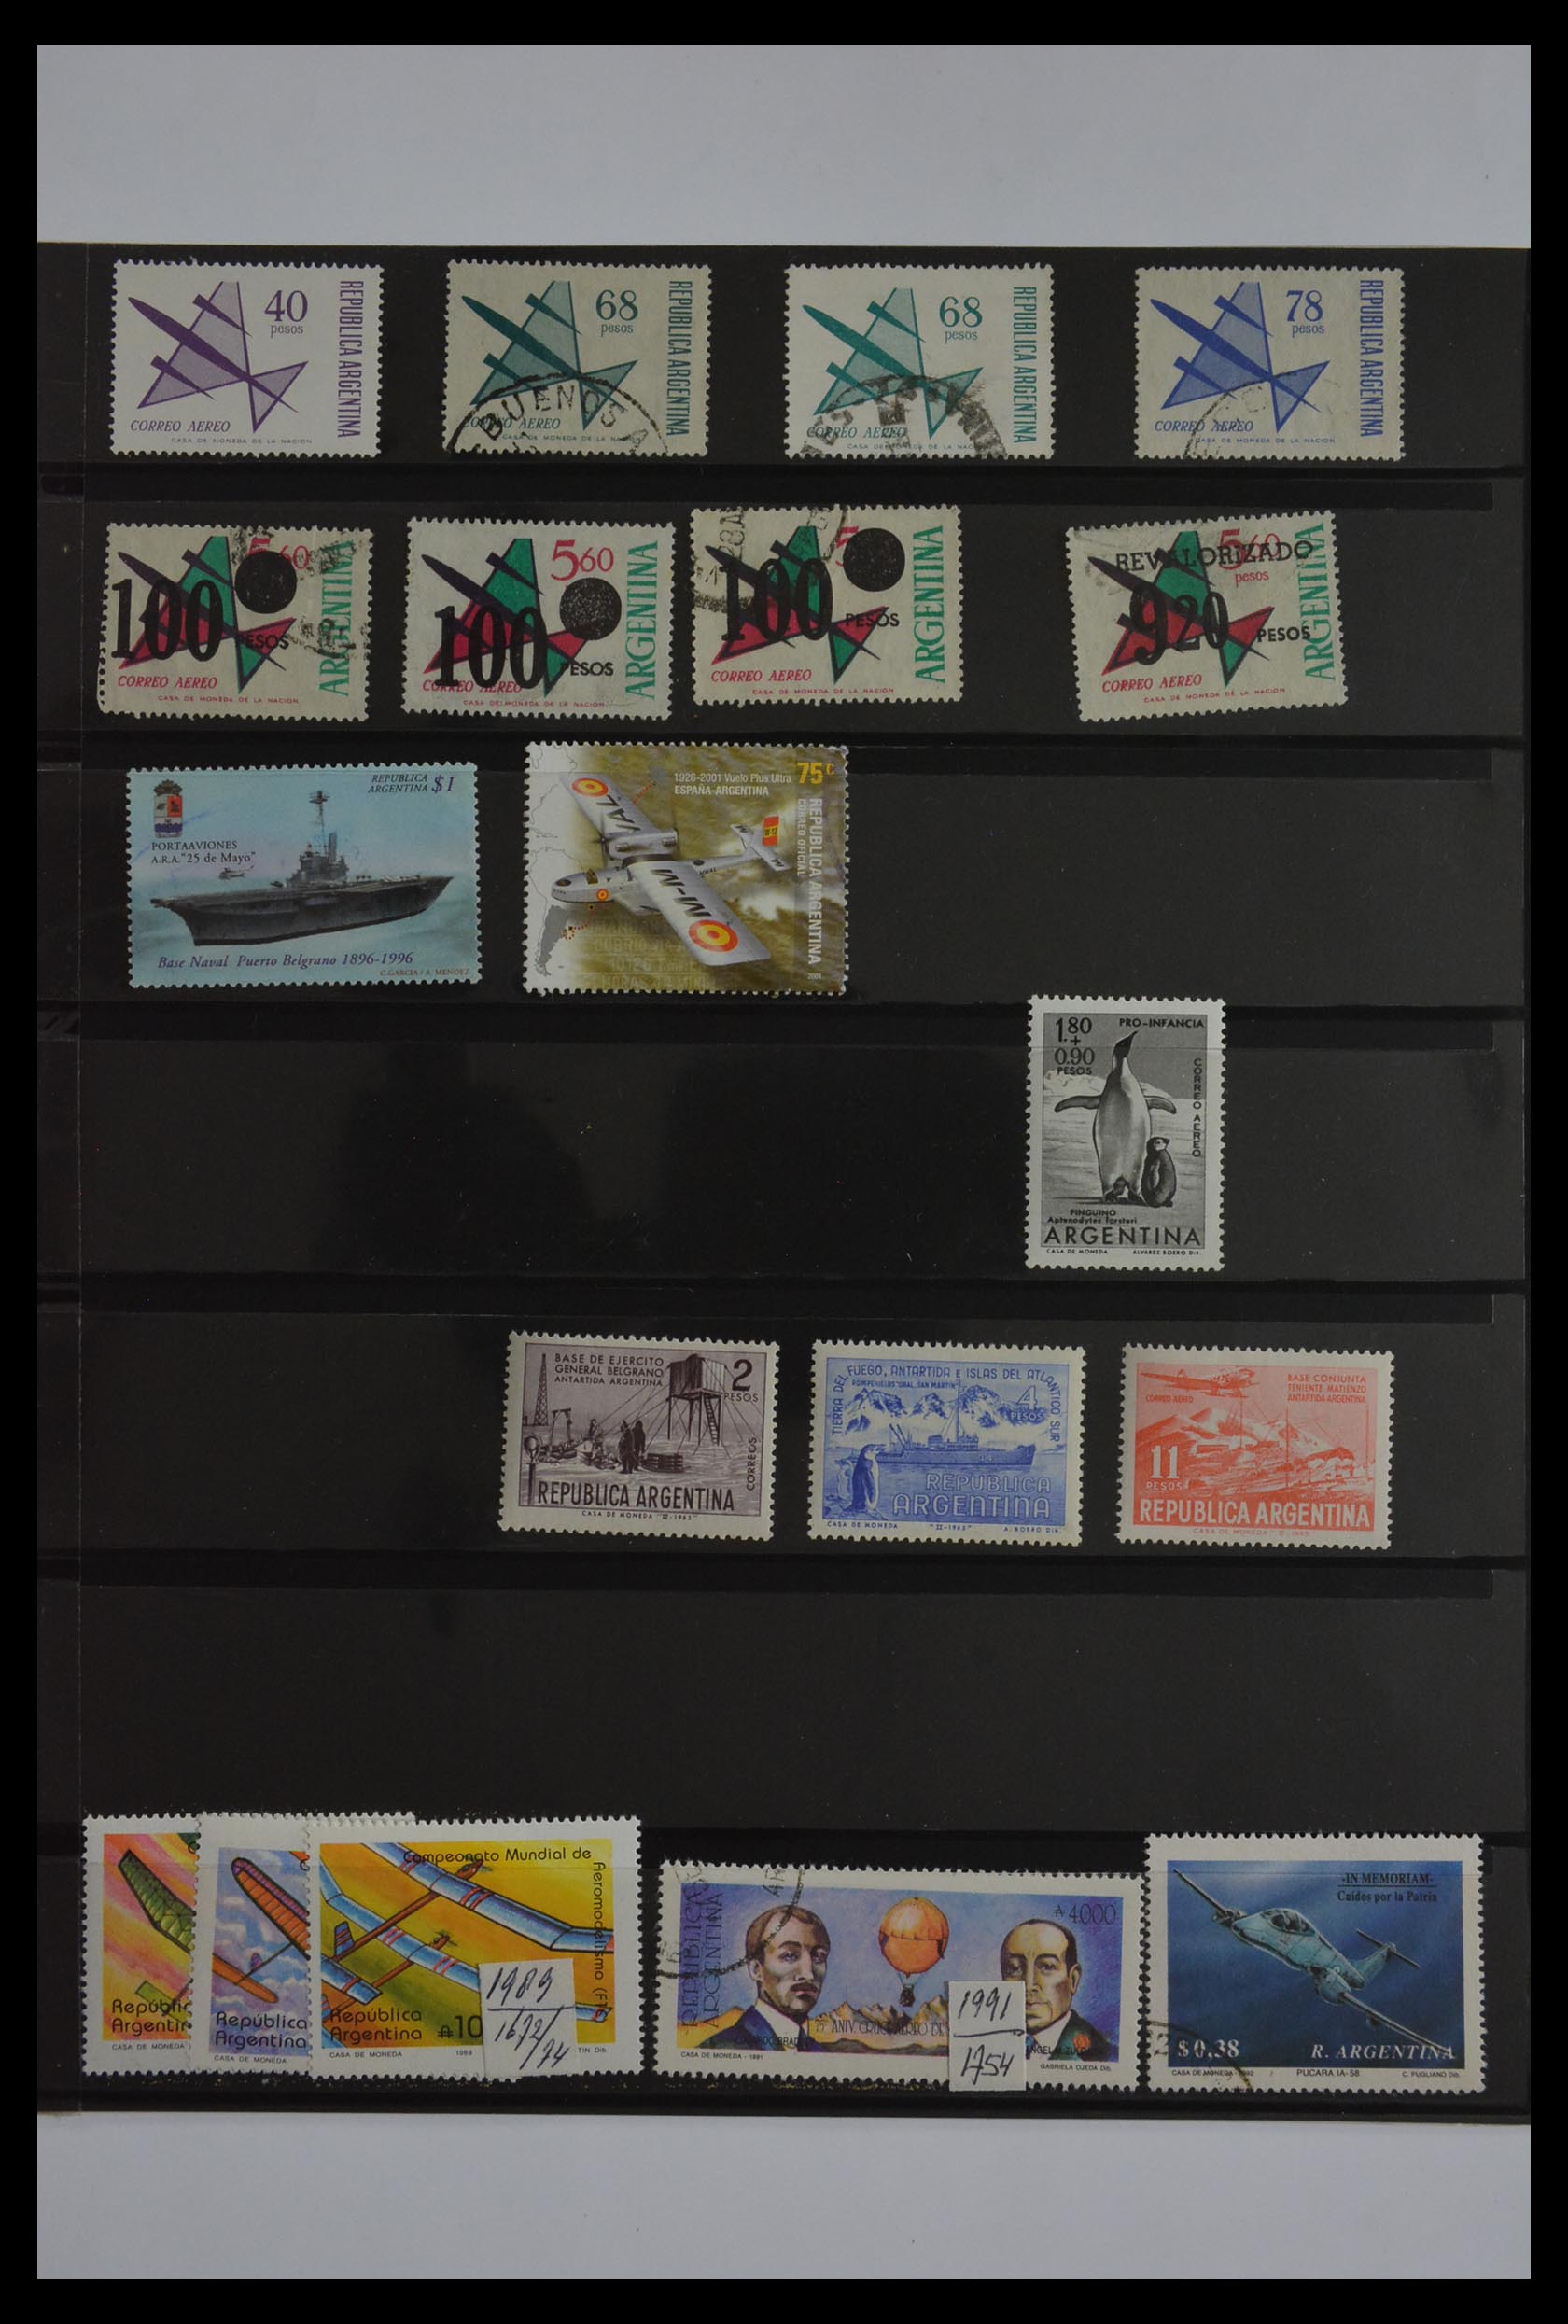 29917 008 - 29917 Latin America airmail stamps.